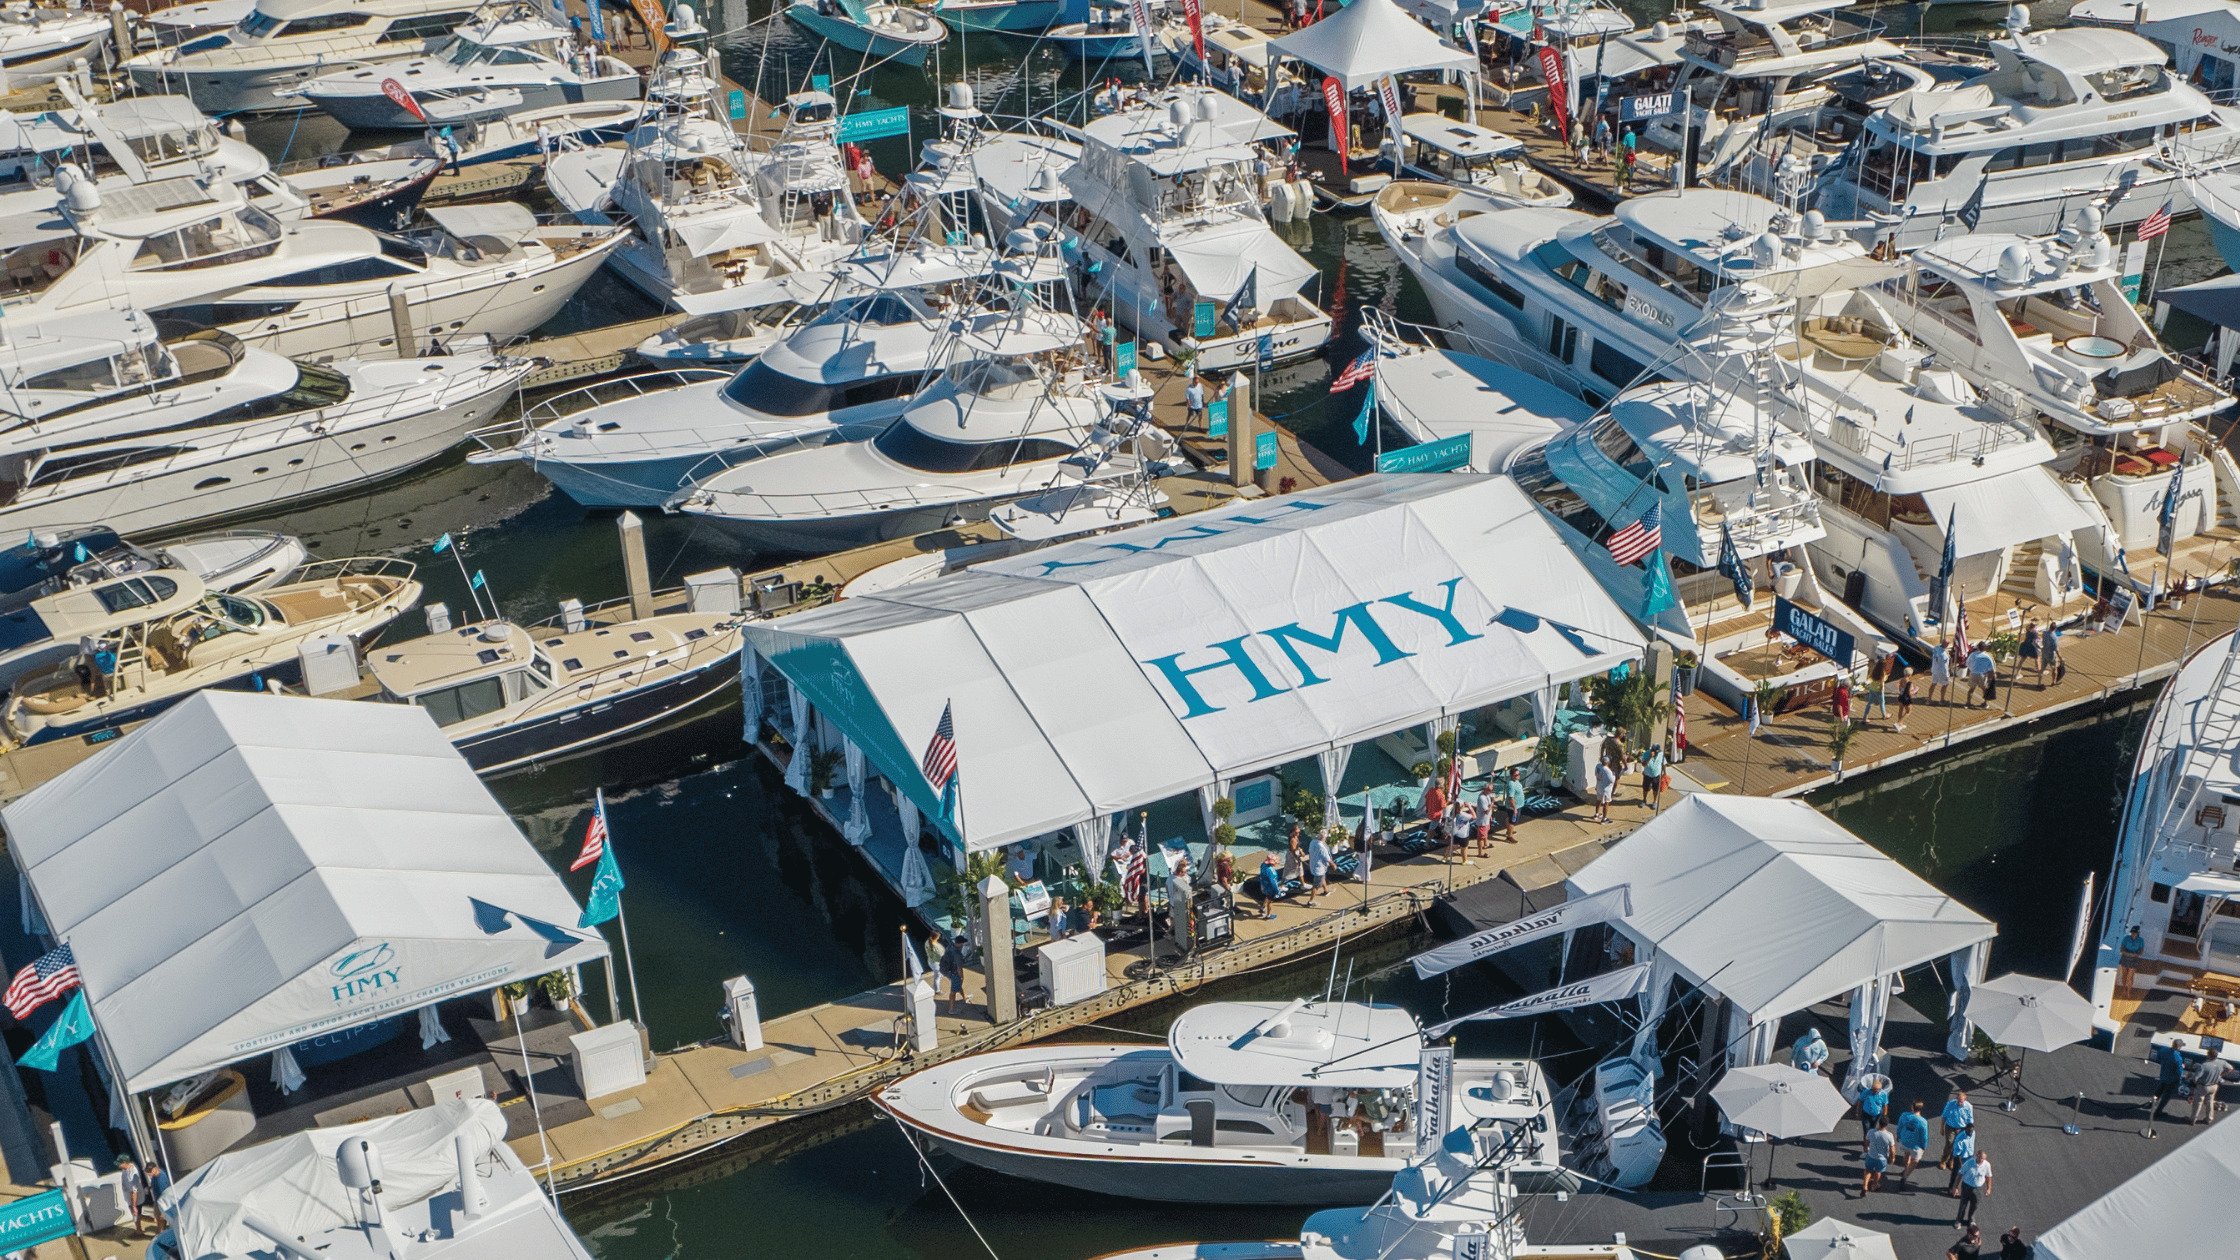 HMY Display at a Boat Show